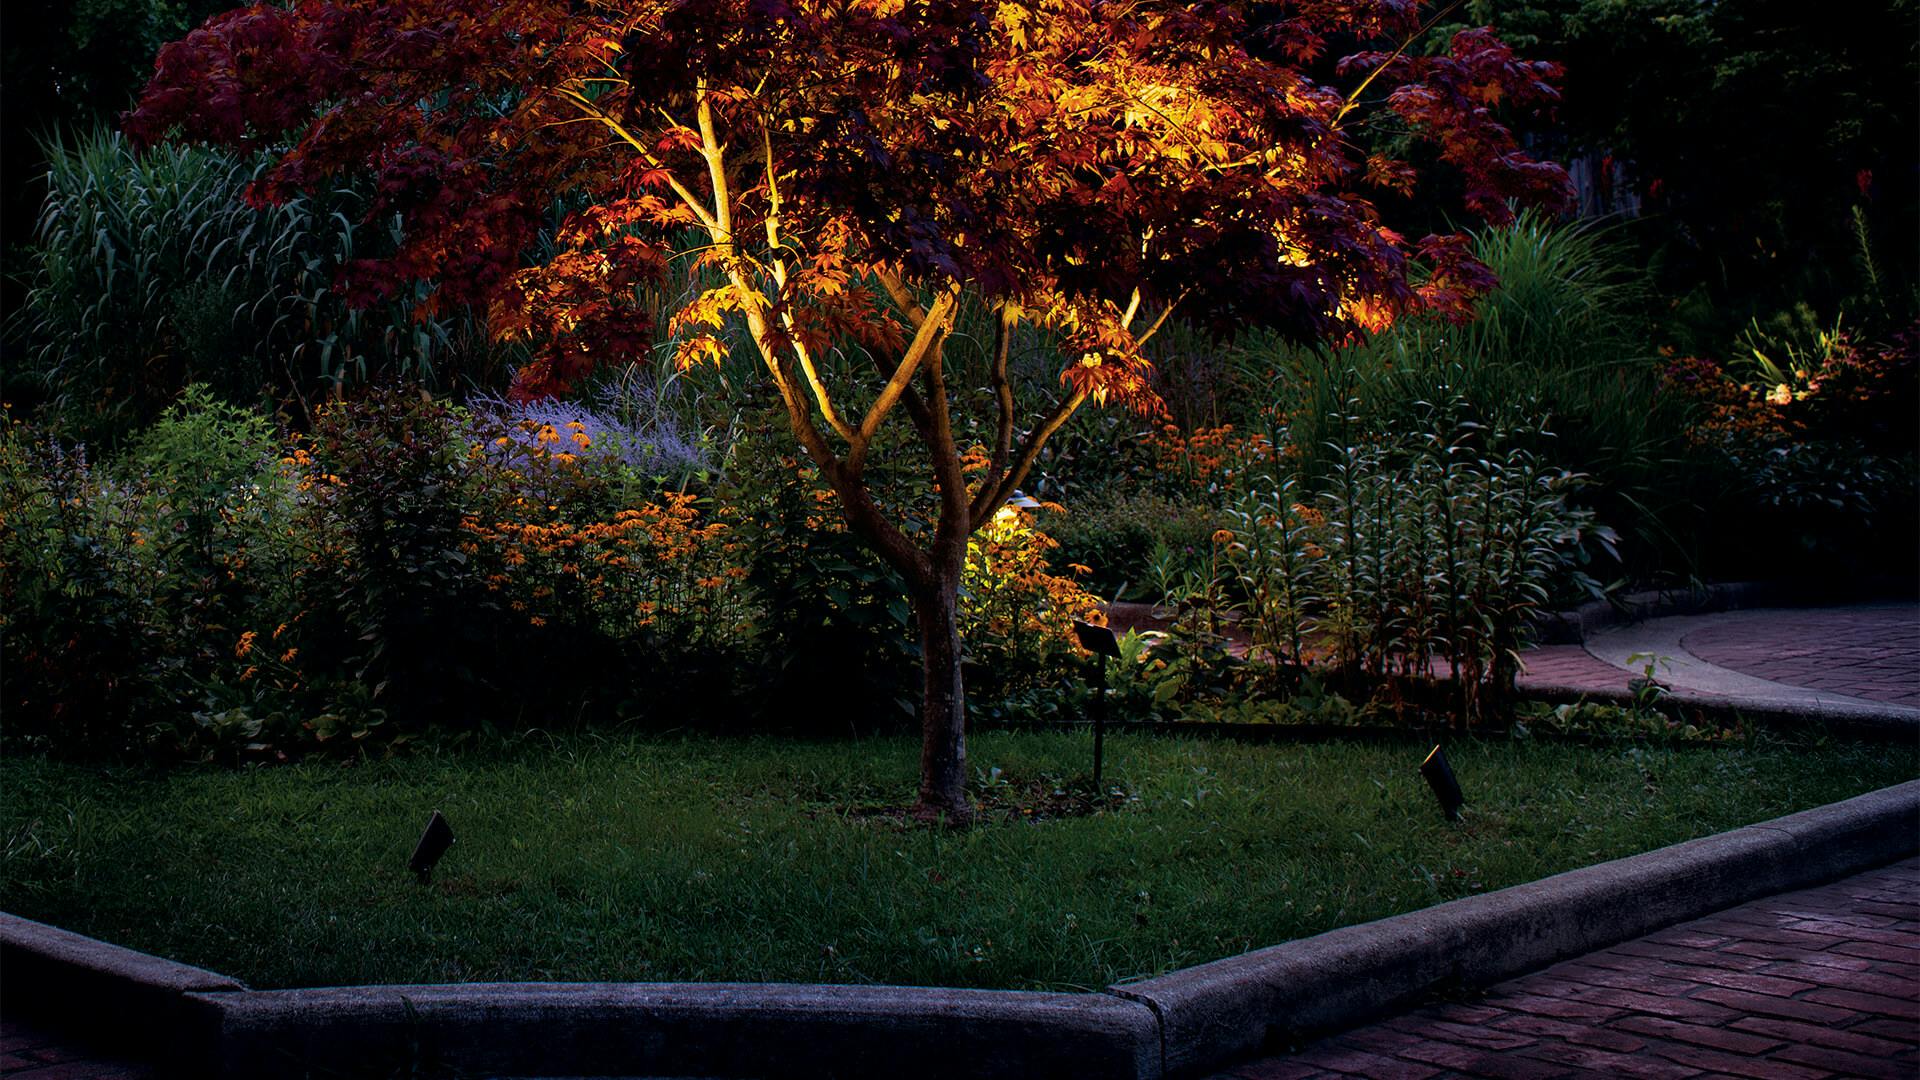 Garden patch with a maple tree with uplights